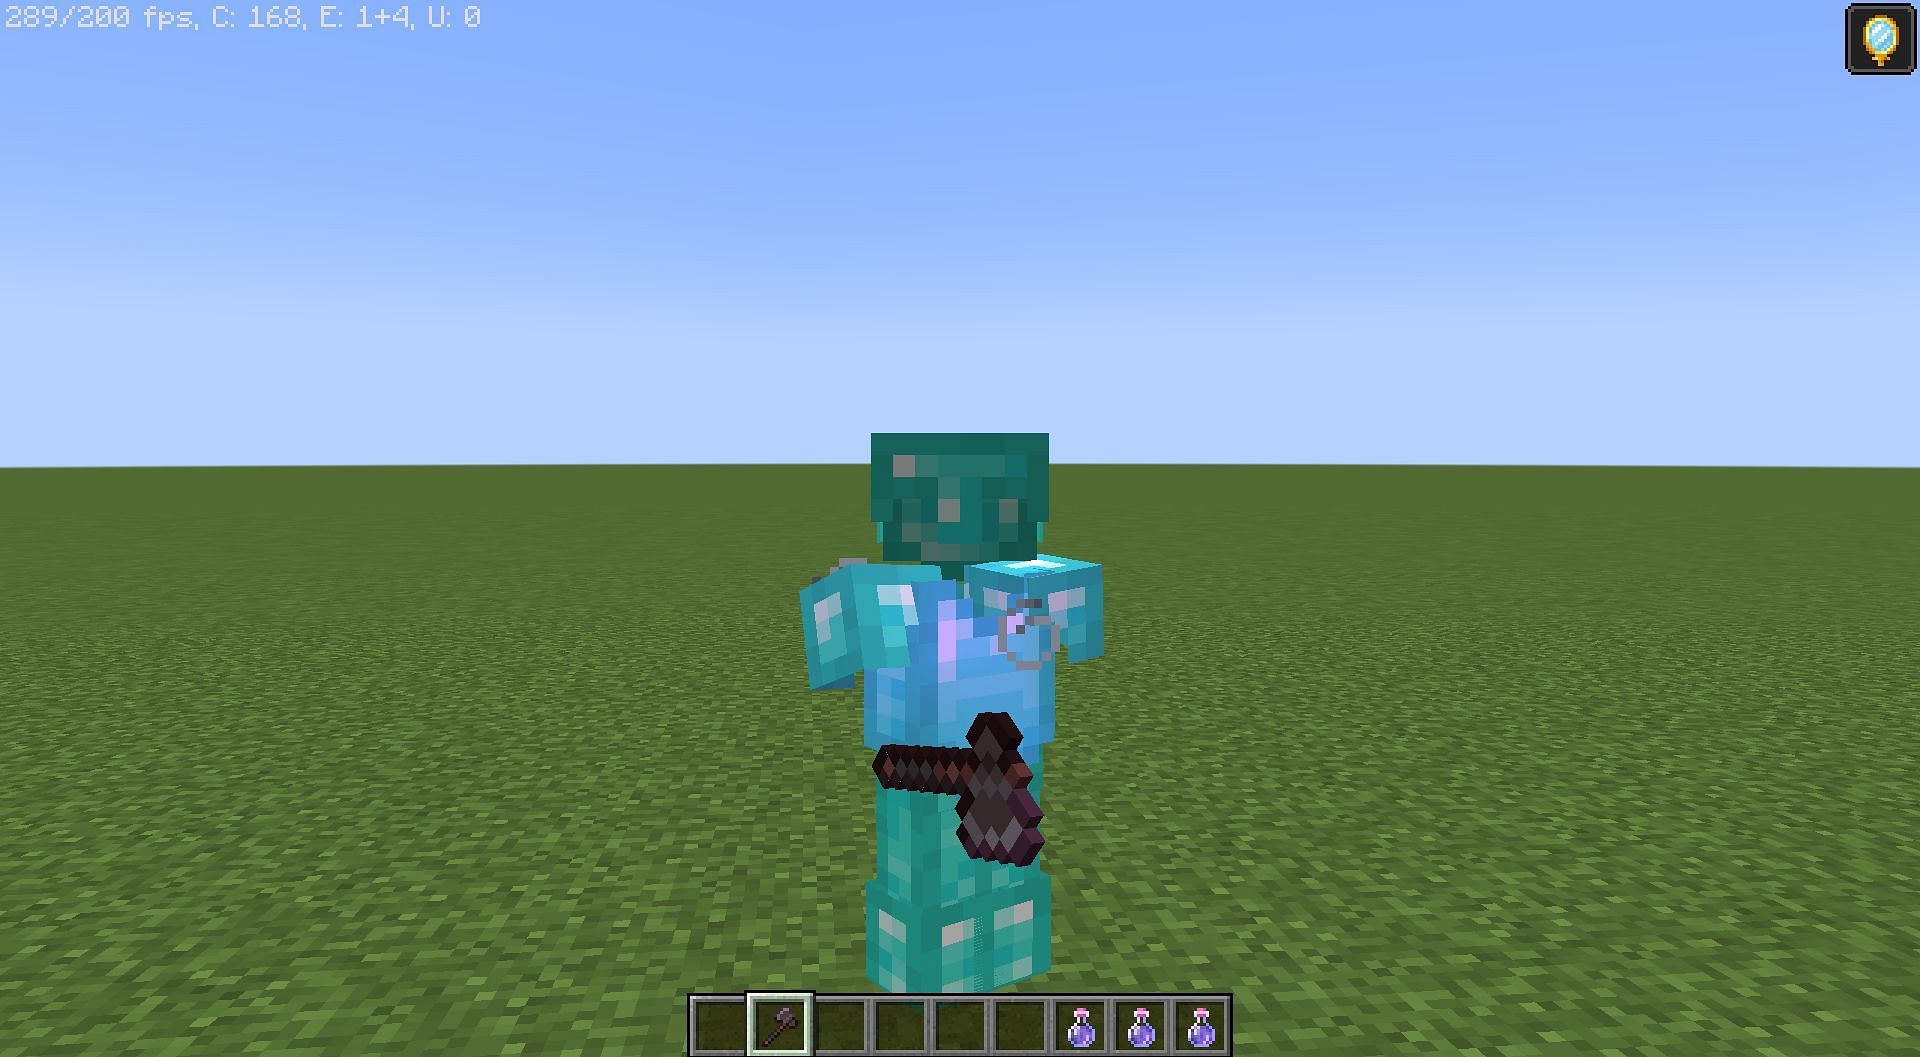 Players can easily become invisible if they have the right items in Minecraft (Image via Mojang)